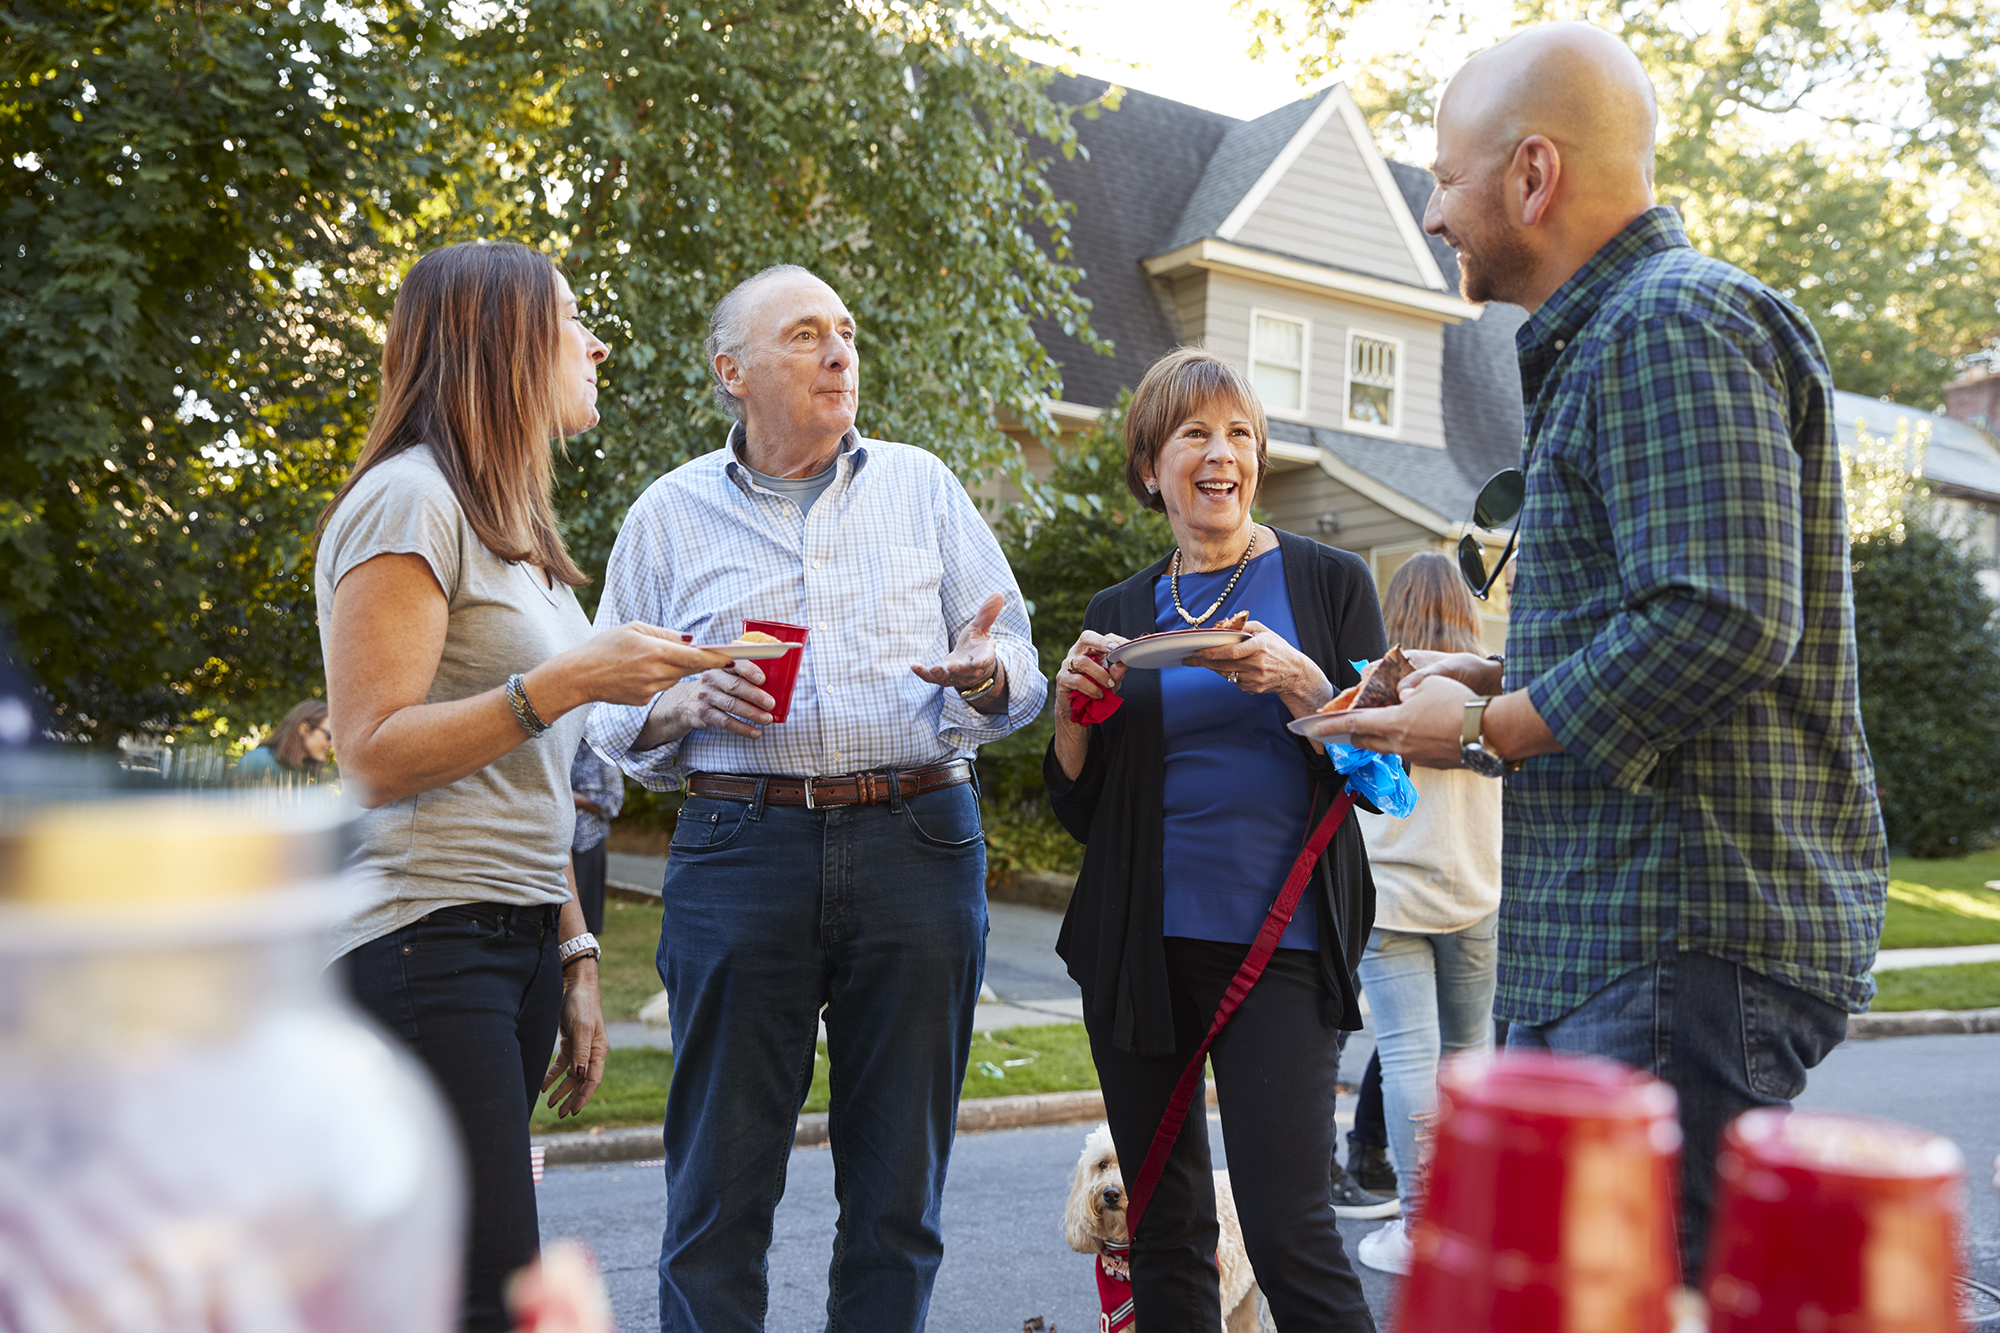 Personalized neighbor are the friends who lend sugar and laughter